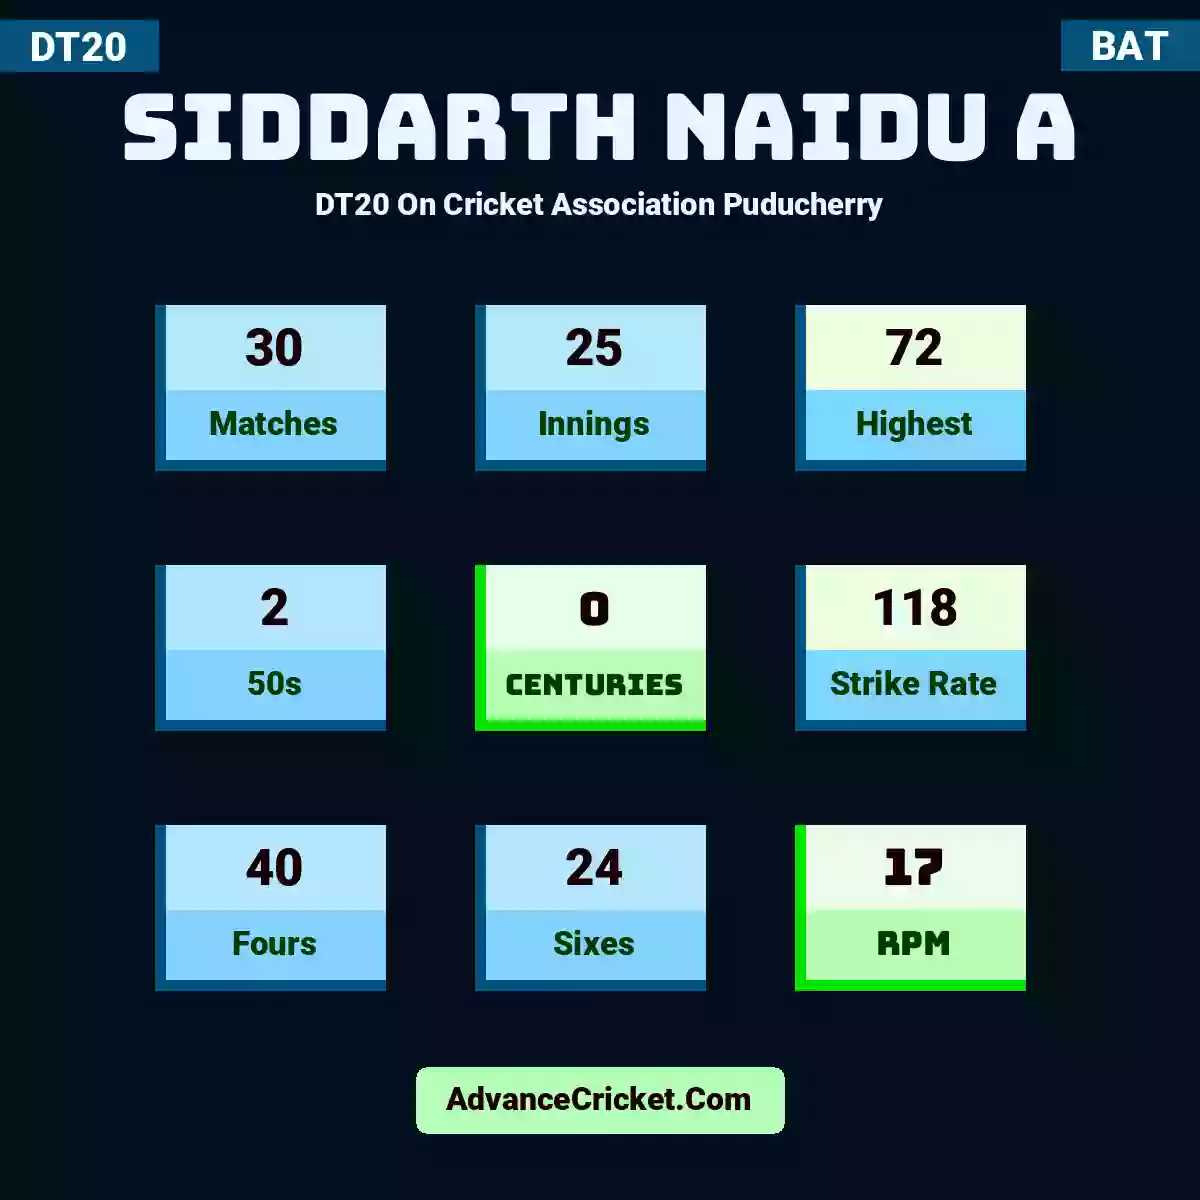 Siddarth Naidu A DT20  On Cricket Association Puducherry, Siddarth Naidu A played 30 matches, scored 72 runs as highest, 2 half-centuries, and 0 centuries, with a strike rate of 118. S.Naidu.A hit 40 fours and 24 sixes, with an RPM of 17.